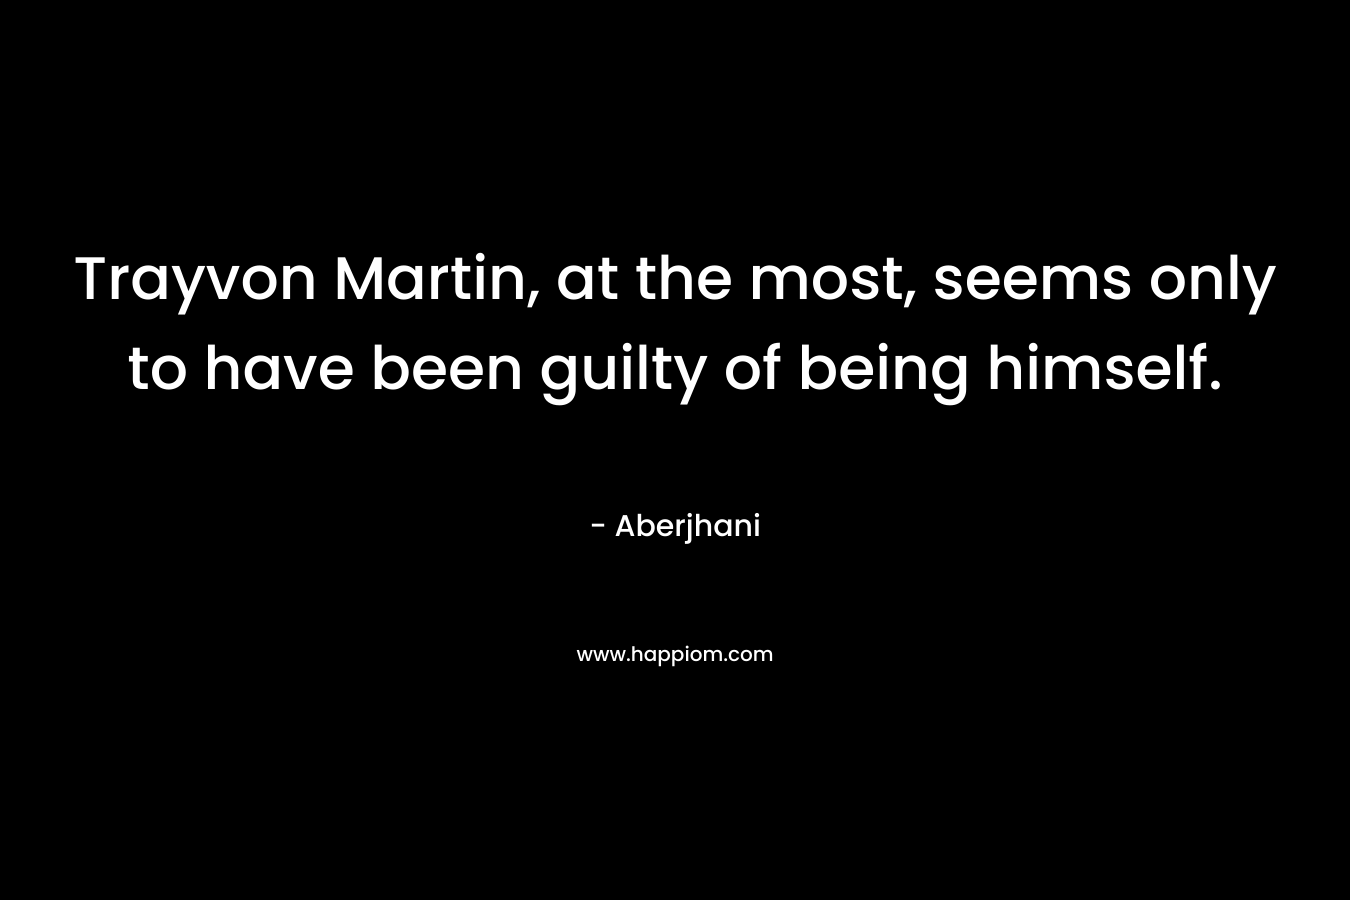 Trayvon Martin, at the most, seems only to have been guilty of being himself.